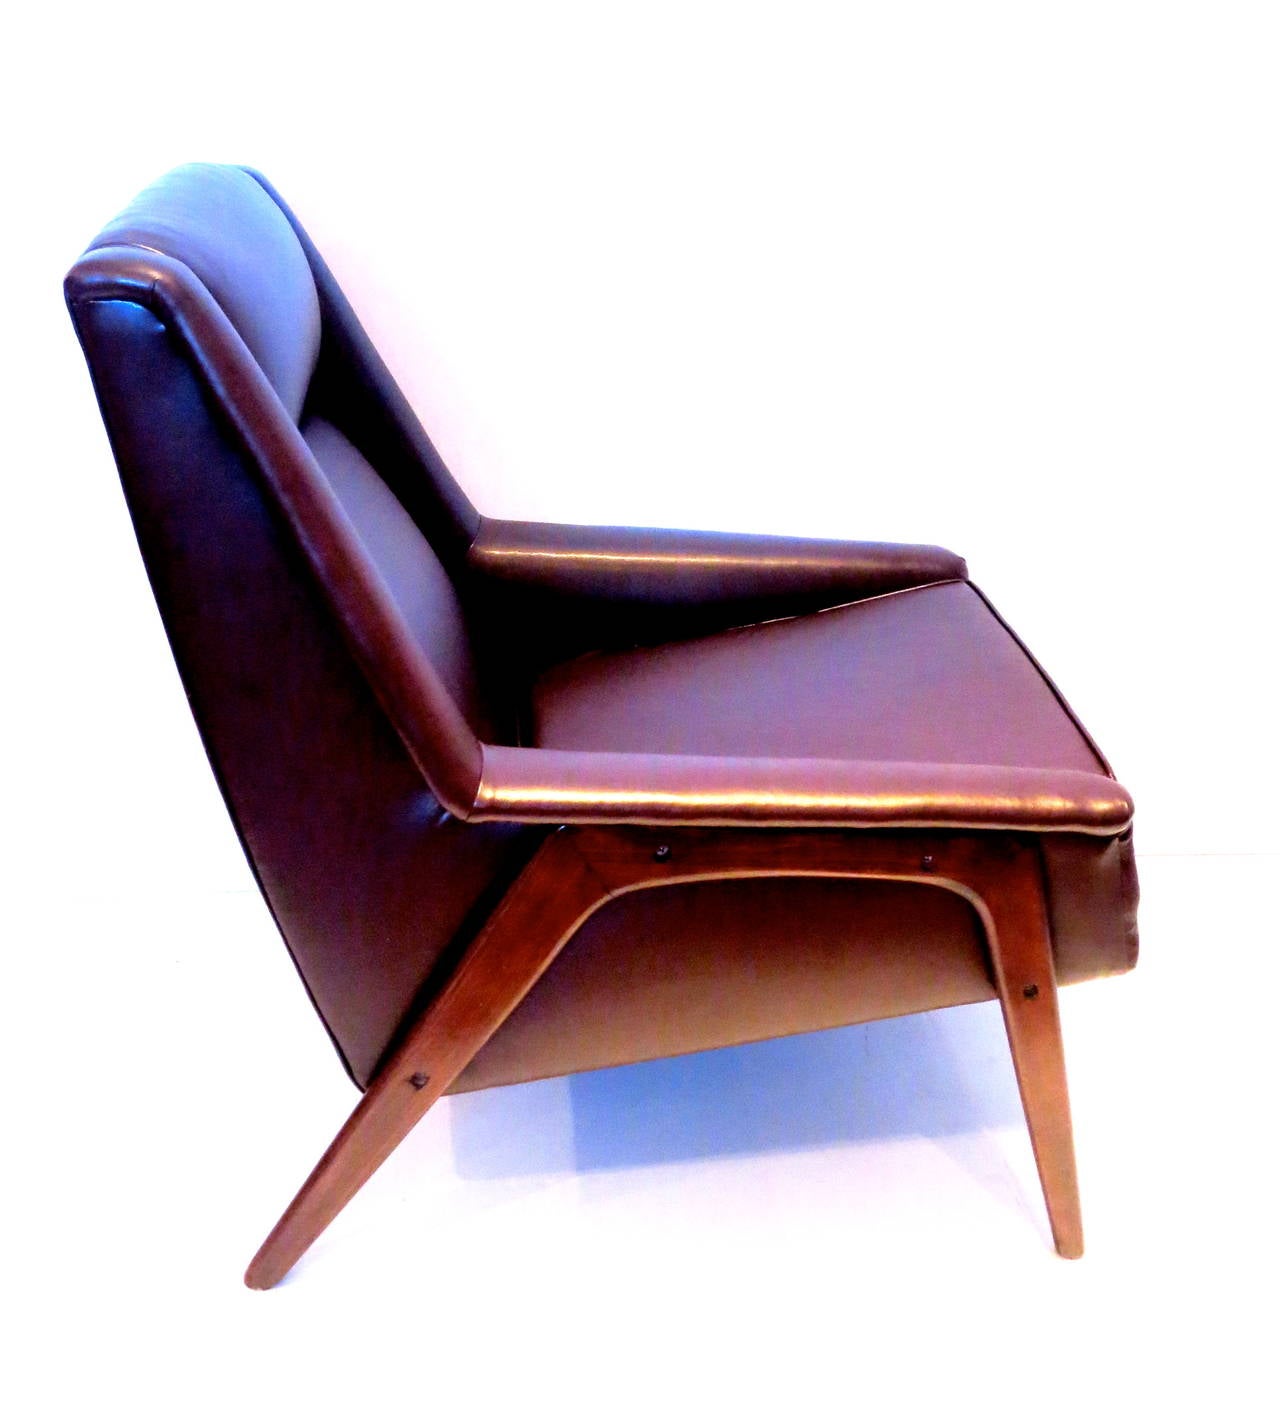 Striking chocolate brown arm chair designed by Folke Ohlson, for DUX of Sweden the chair its completly restored , in leather the legs are refinished in walnut stain the chair its solid sturdy and comfy .